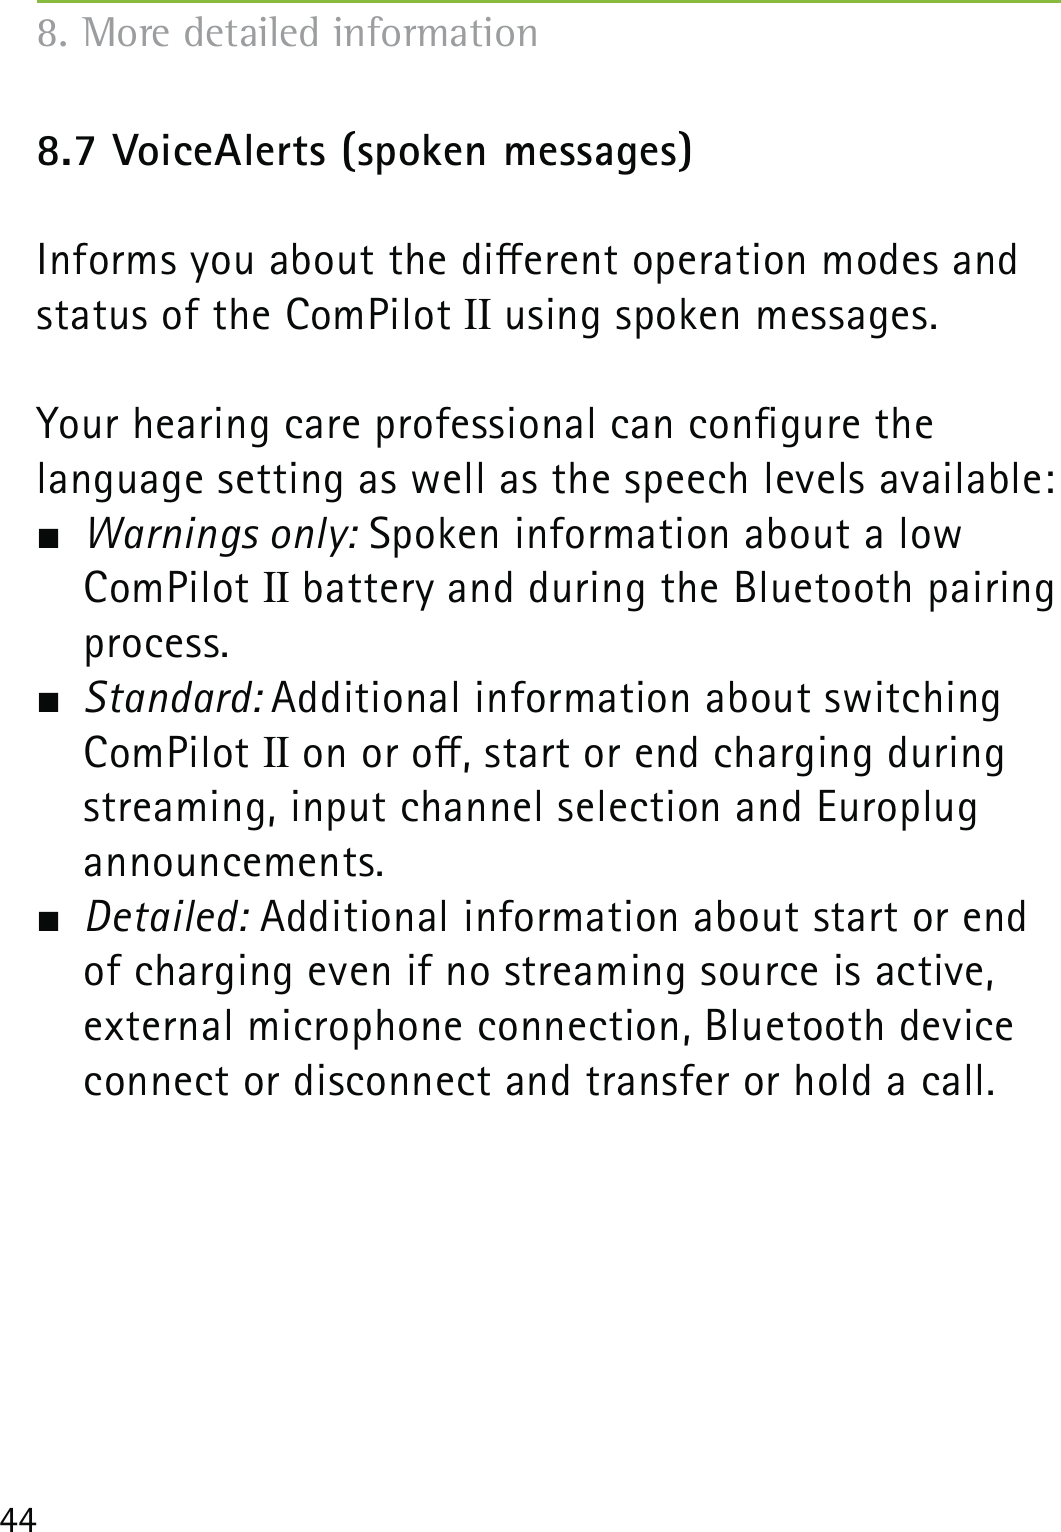 448.7 VoiceAlerts (spoken messages)Informs you about the dierent operation modes and status of the ComPilot II using spoken messages.Your hearing care professional can congure the  language setting as well as the speech levels available: Warnings only: Spoken information about a low ComPilot II battery and during the Bluetooth pairing process. Standard: Additional information about switching ComPilot II on or o, start or end charging during streaming, input channel selection and Europlug  announcements. Detailed: Additional information about start or end of charging even if no streaming source is active, external microphone connection, Bluetooth device connect or disconnect and transfer or hold a call.8. More detailed information